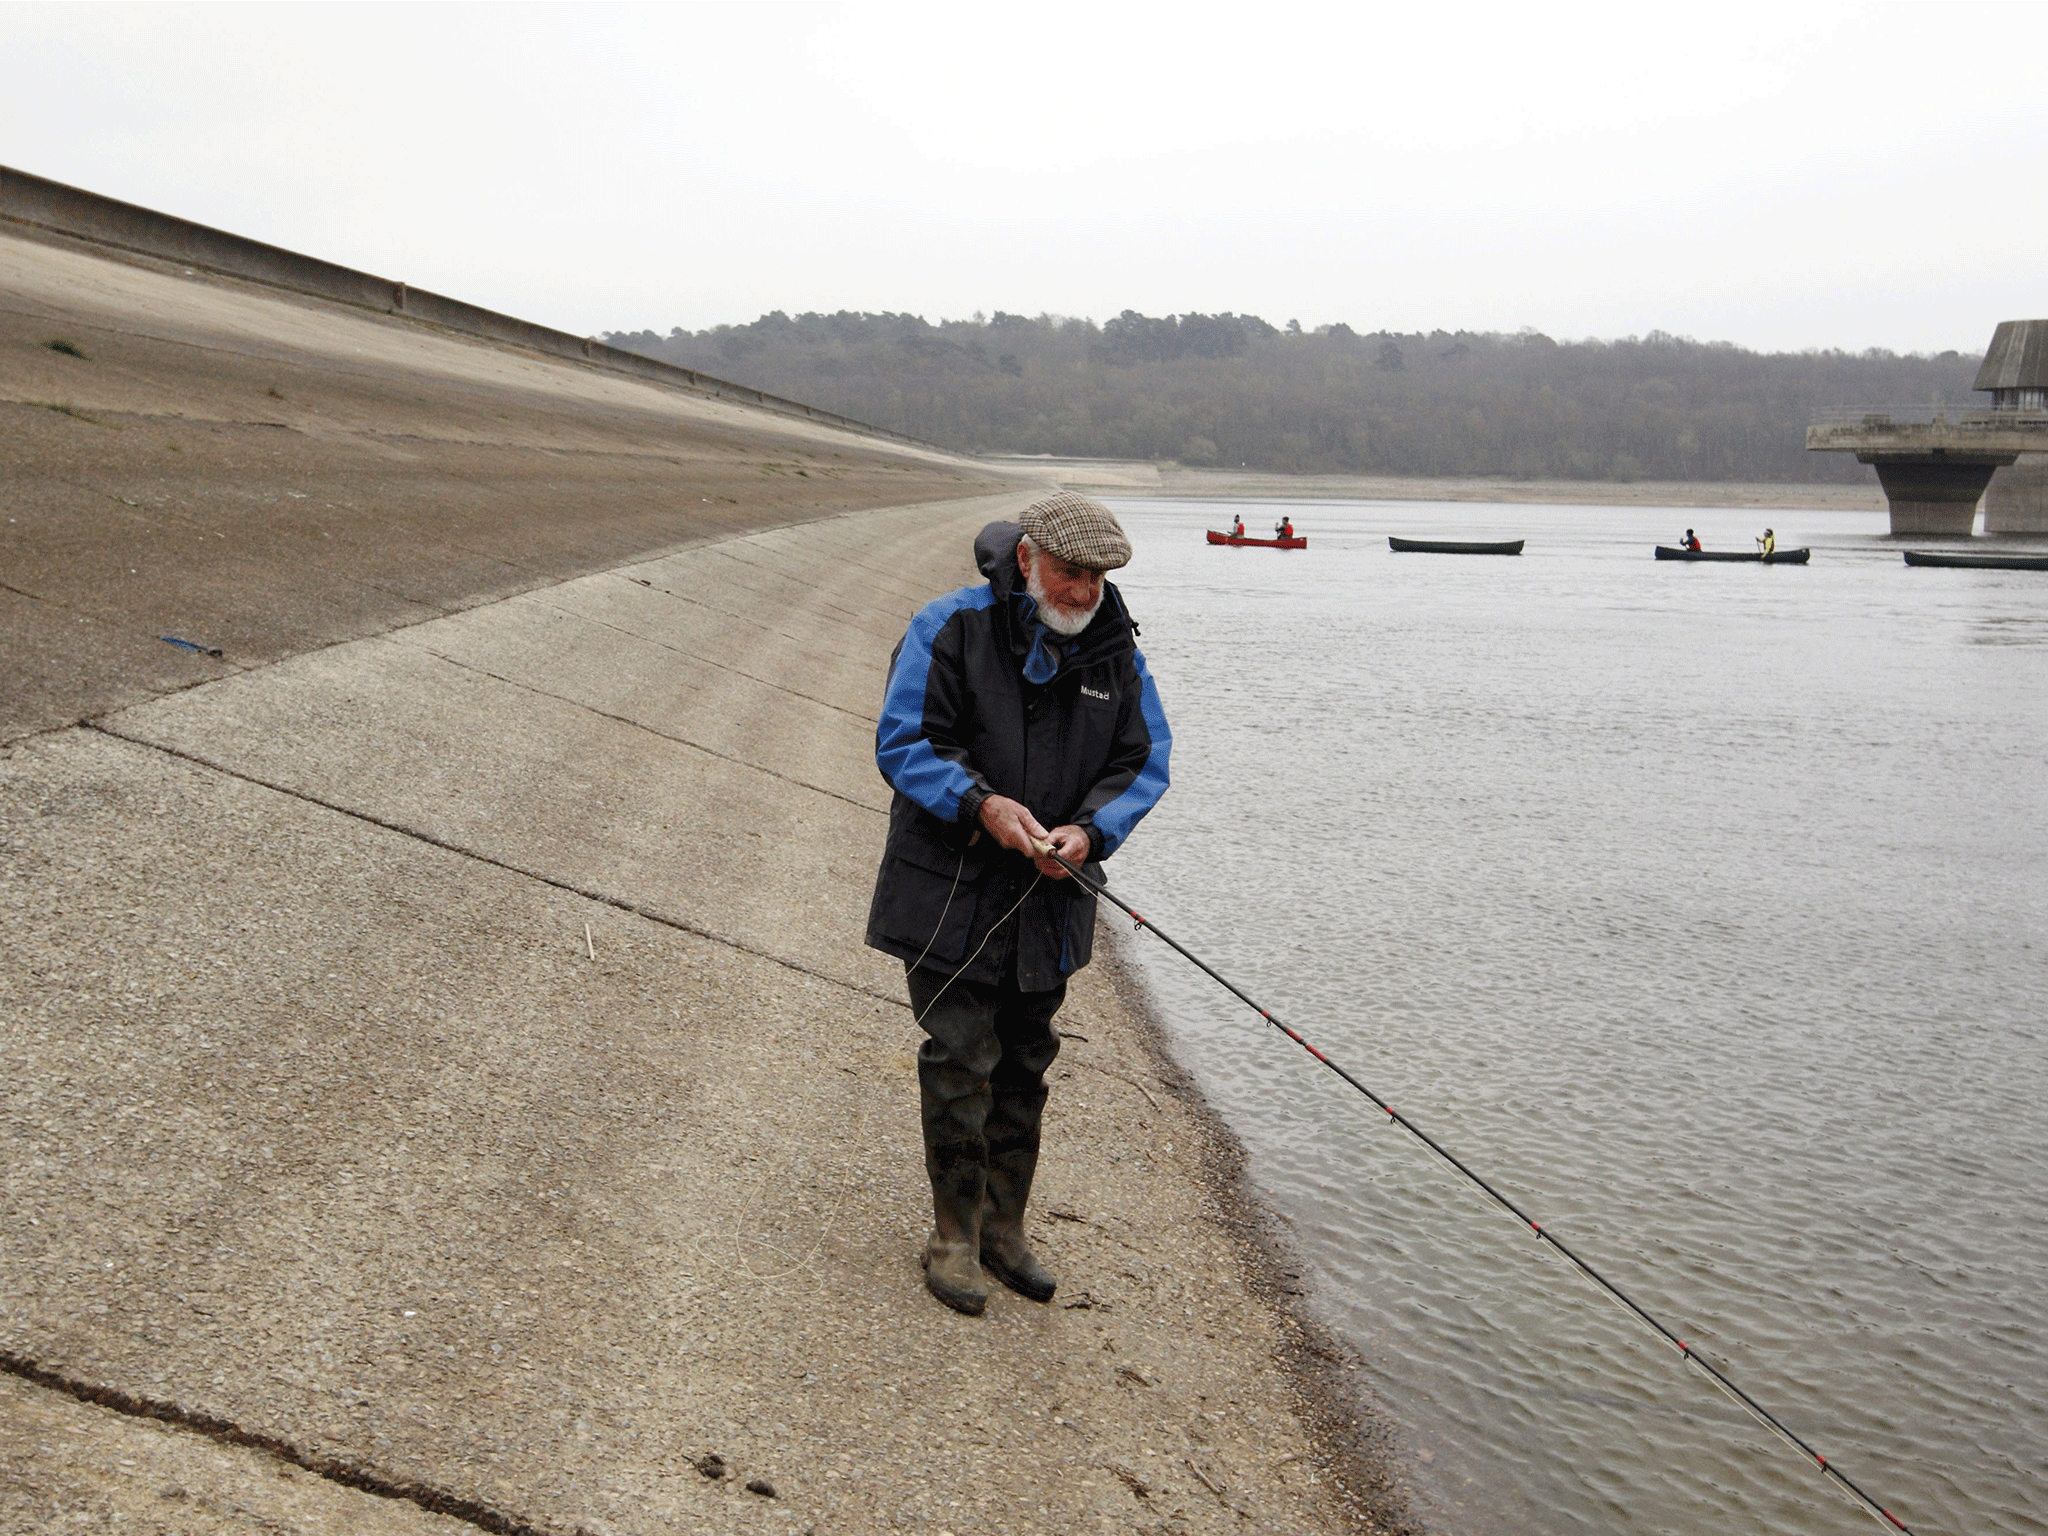 Bewl Water reservoir in Kent is currently less than half full, experts have warned